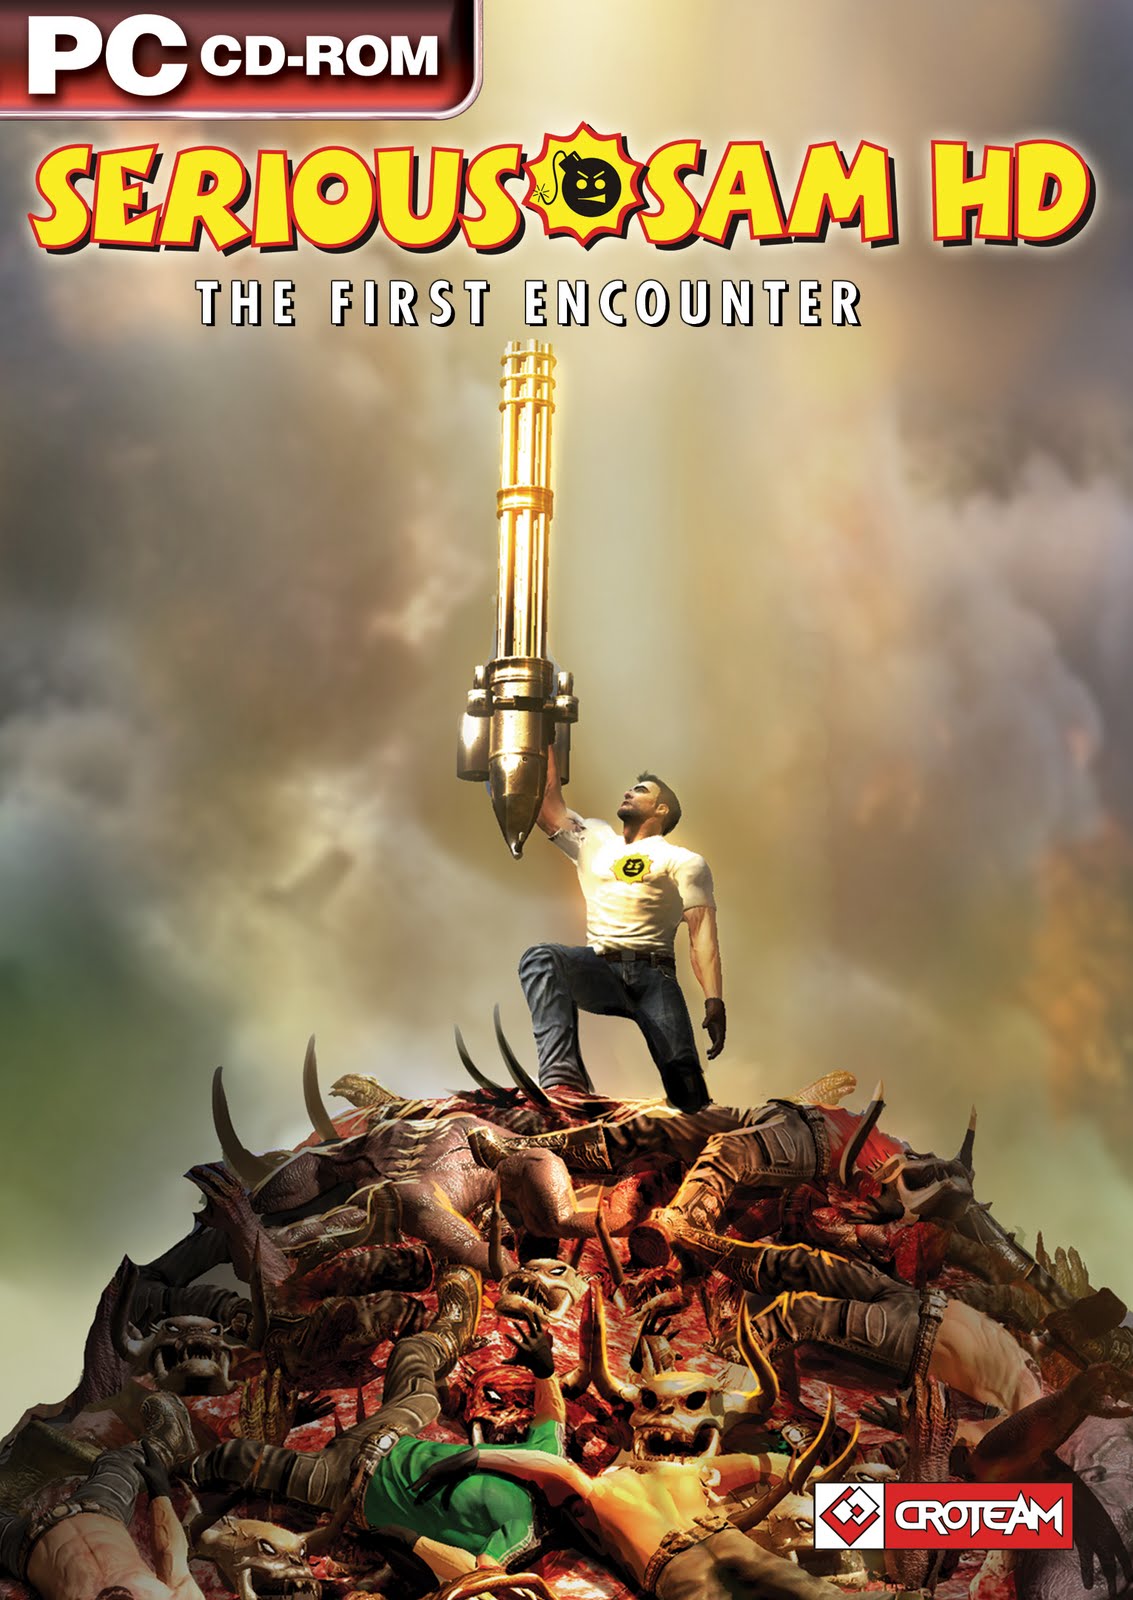 Serious sam hd crack - free search & download - 23 files